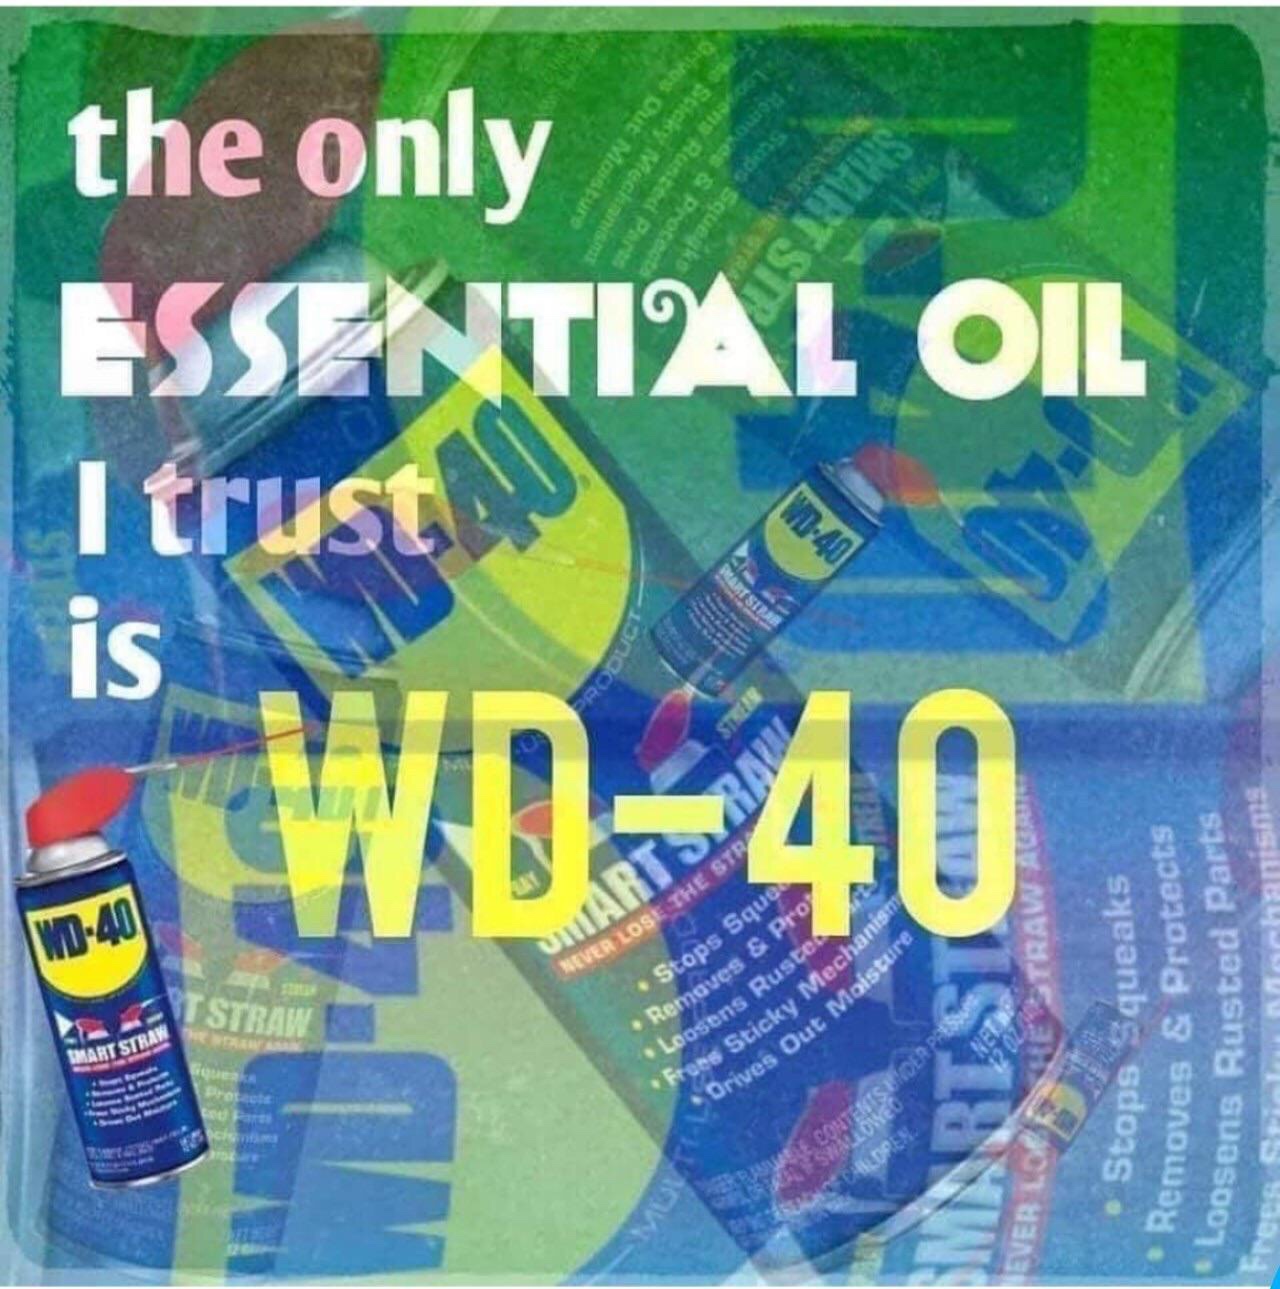 wd 40 is the only essential oil - 1 M05 Veckan the only Essential Oil I trust Is Wd40 stus Er Lose The Straw Stops Sques Removes & Pro Loosens Ruste Tots Sticky Mechan Smart Straw Stops Squeaks Removes & Protects obsens Rusted Parts Verlorene Strawal Oriv